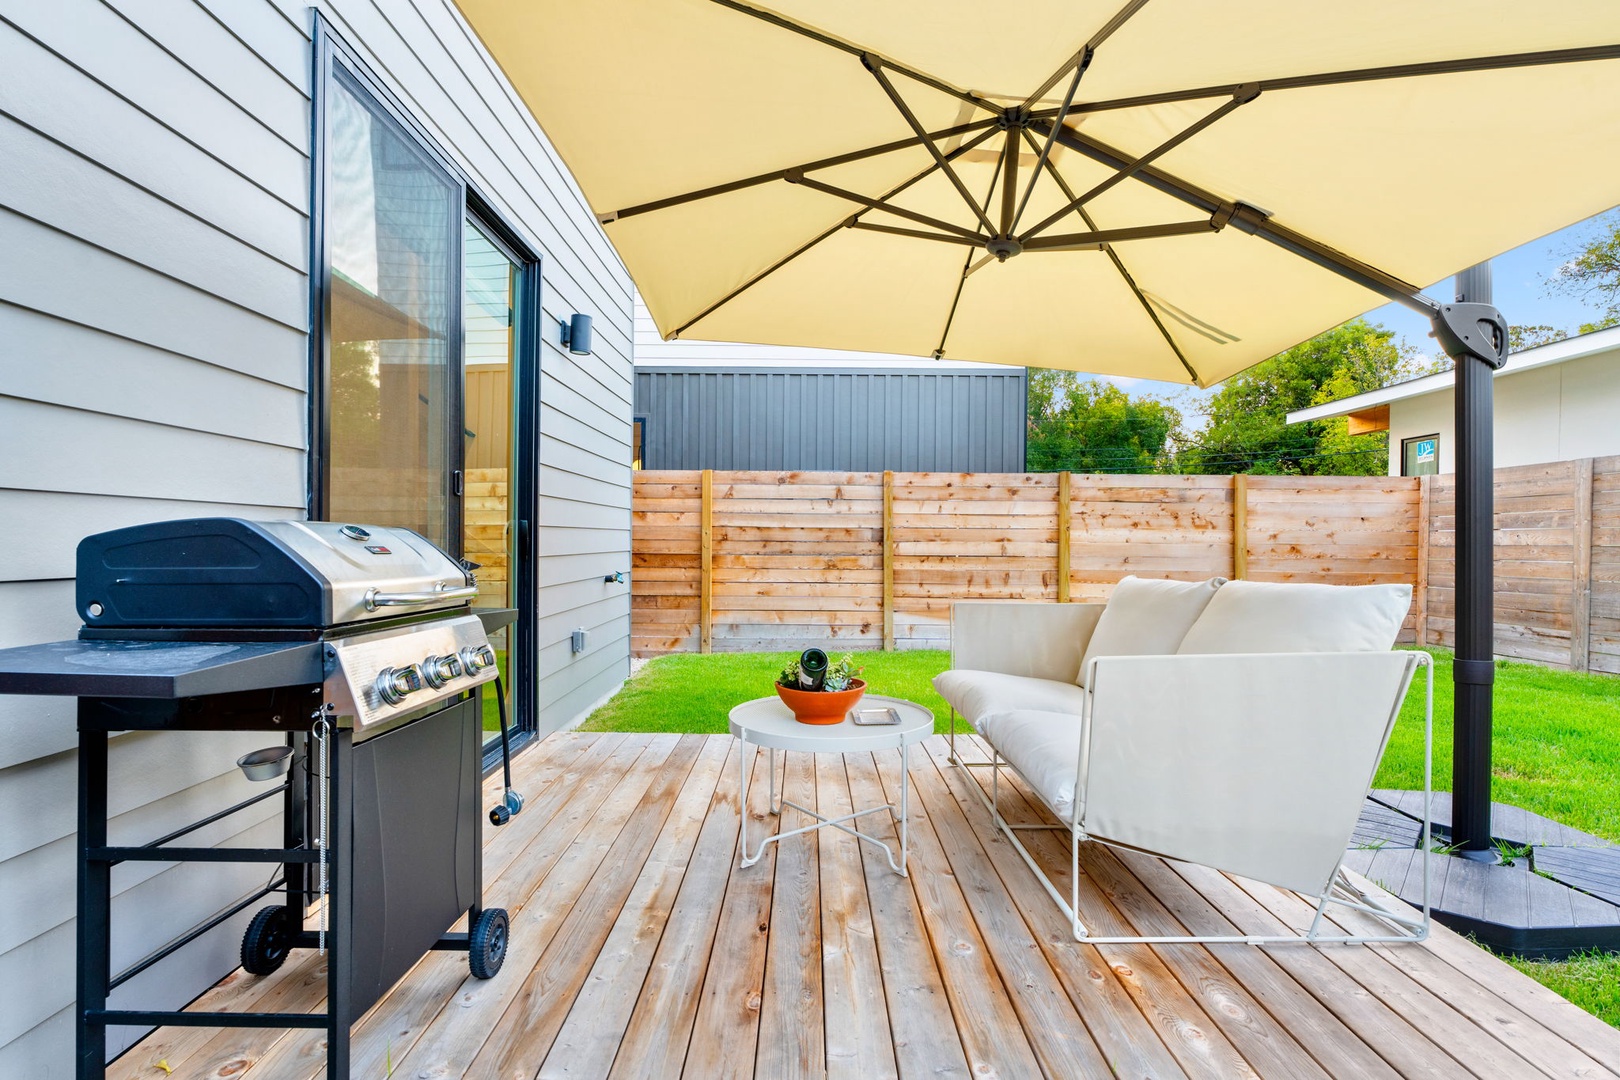 The back deck is the perfect spot for relaxation & grilling up a feast